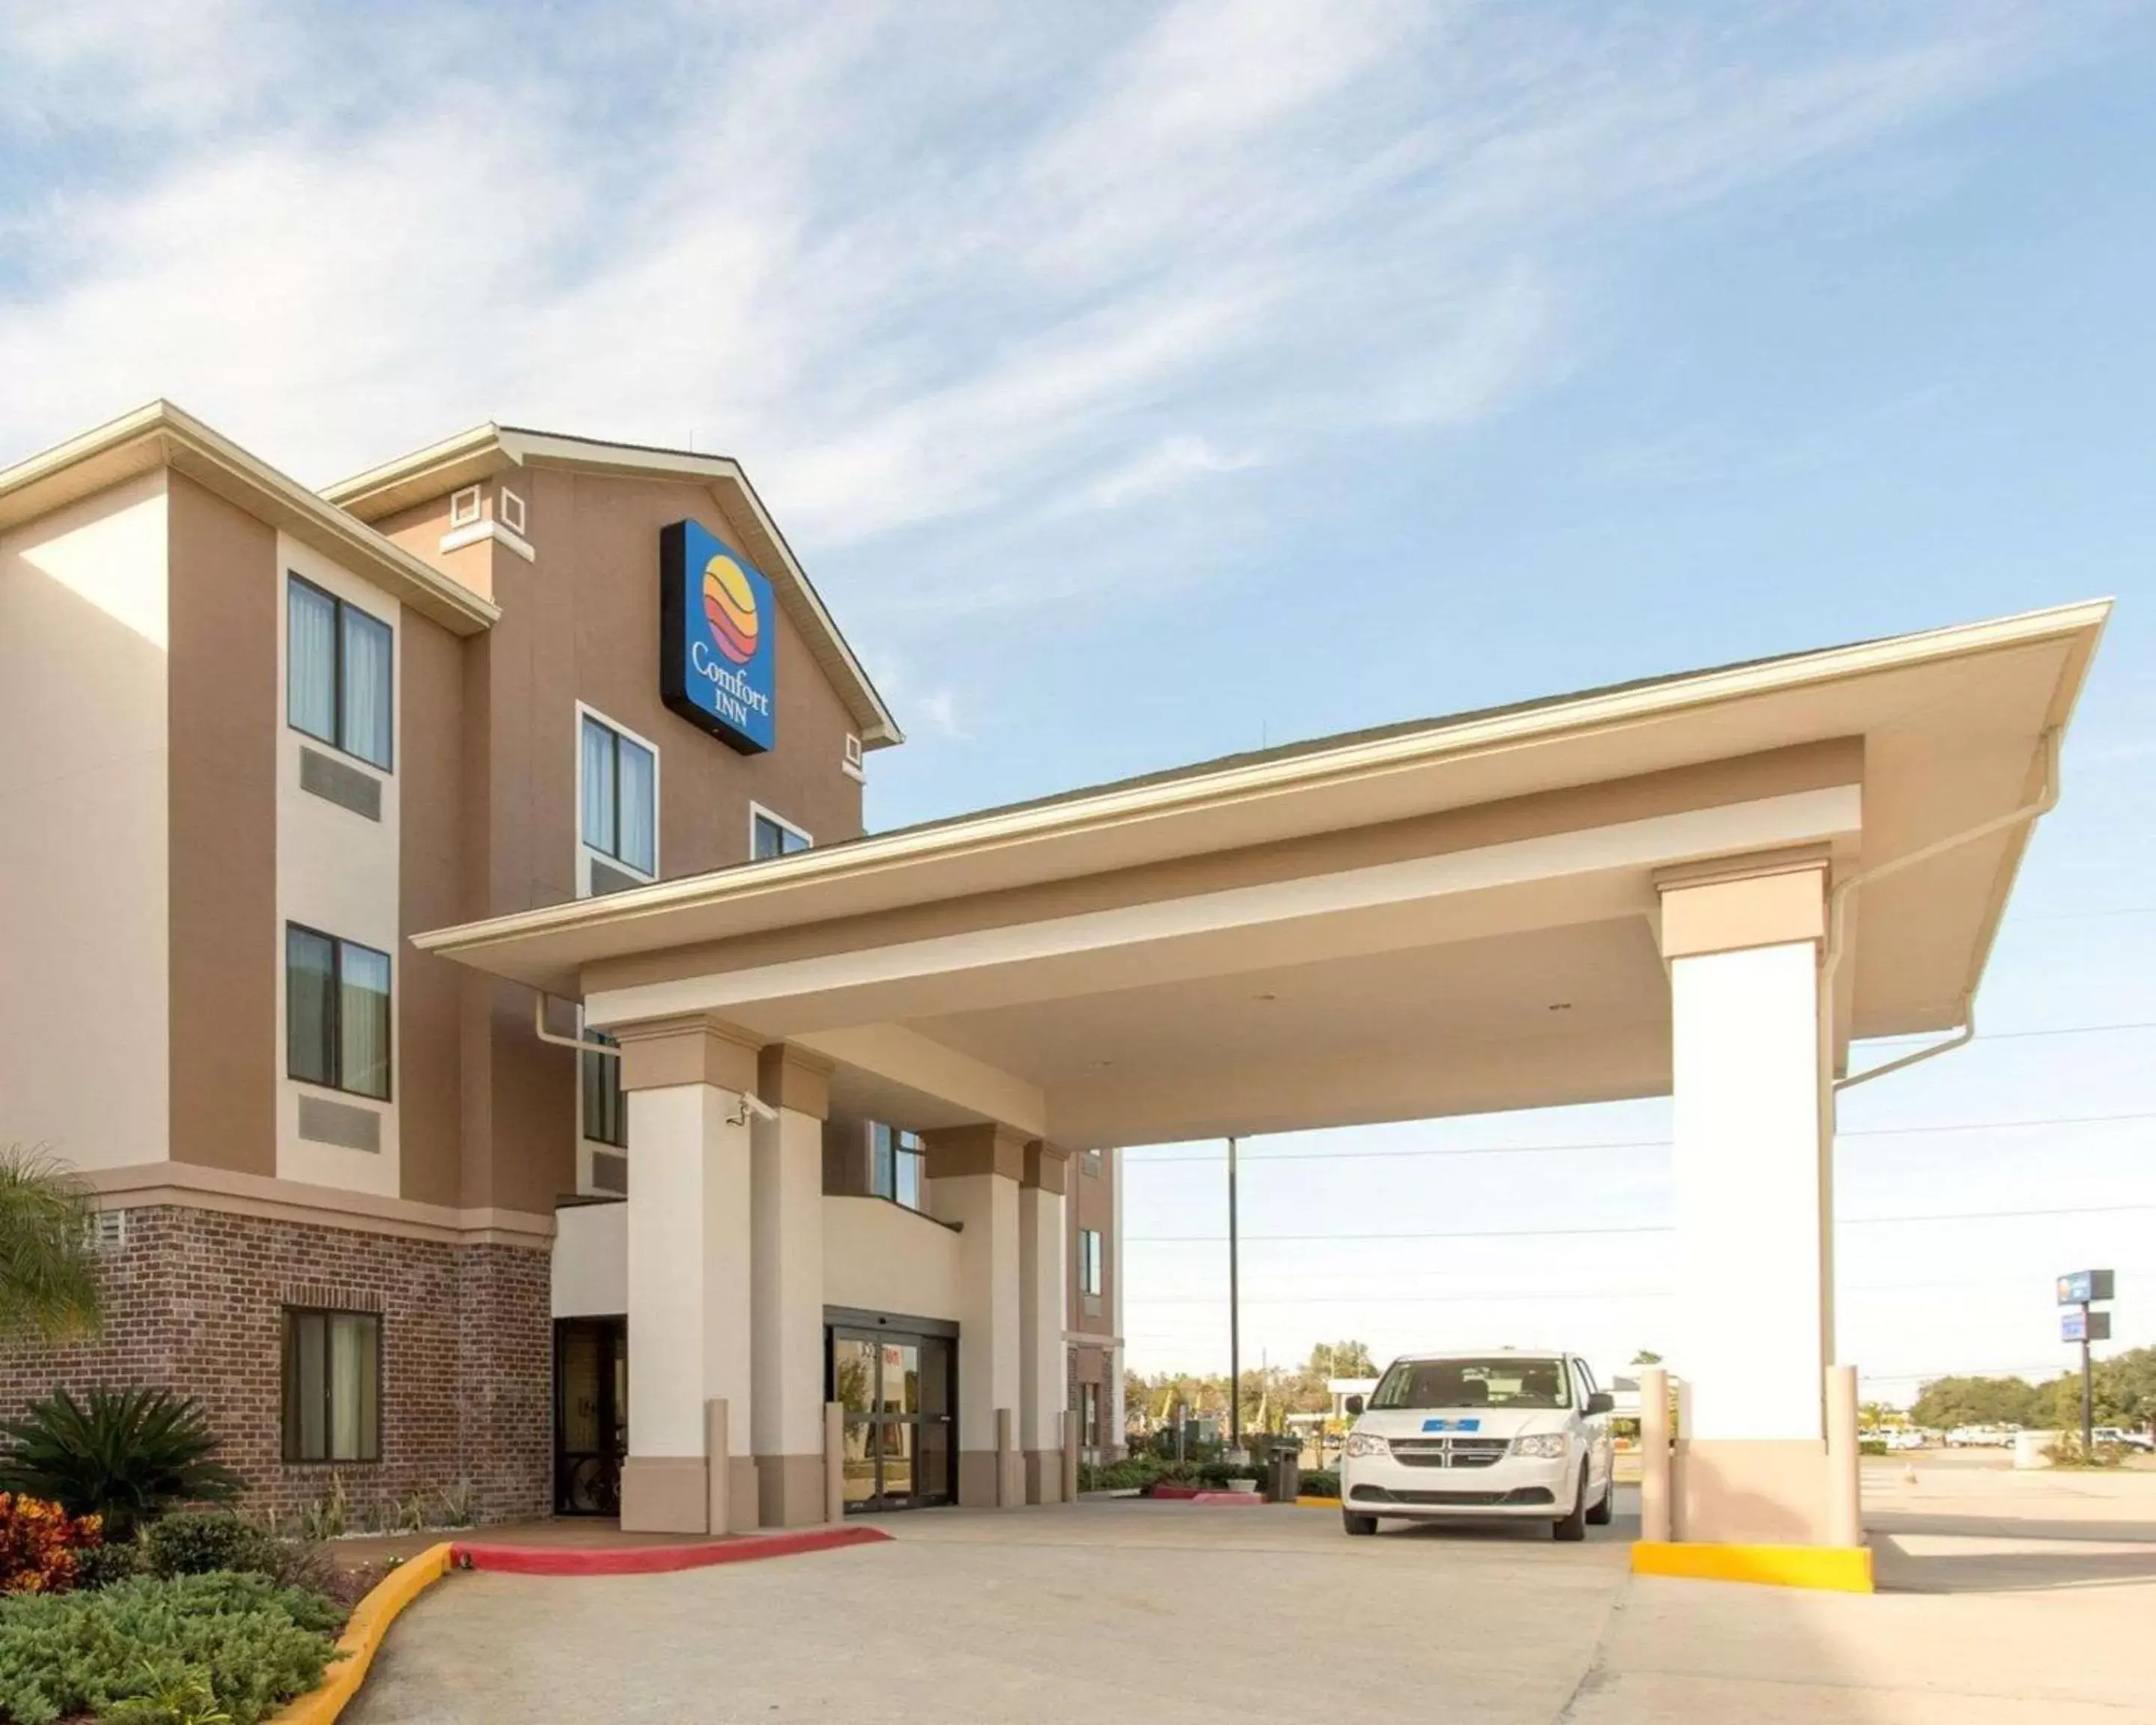 Property Building in Comfort Inn New Orleans Airport South